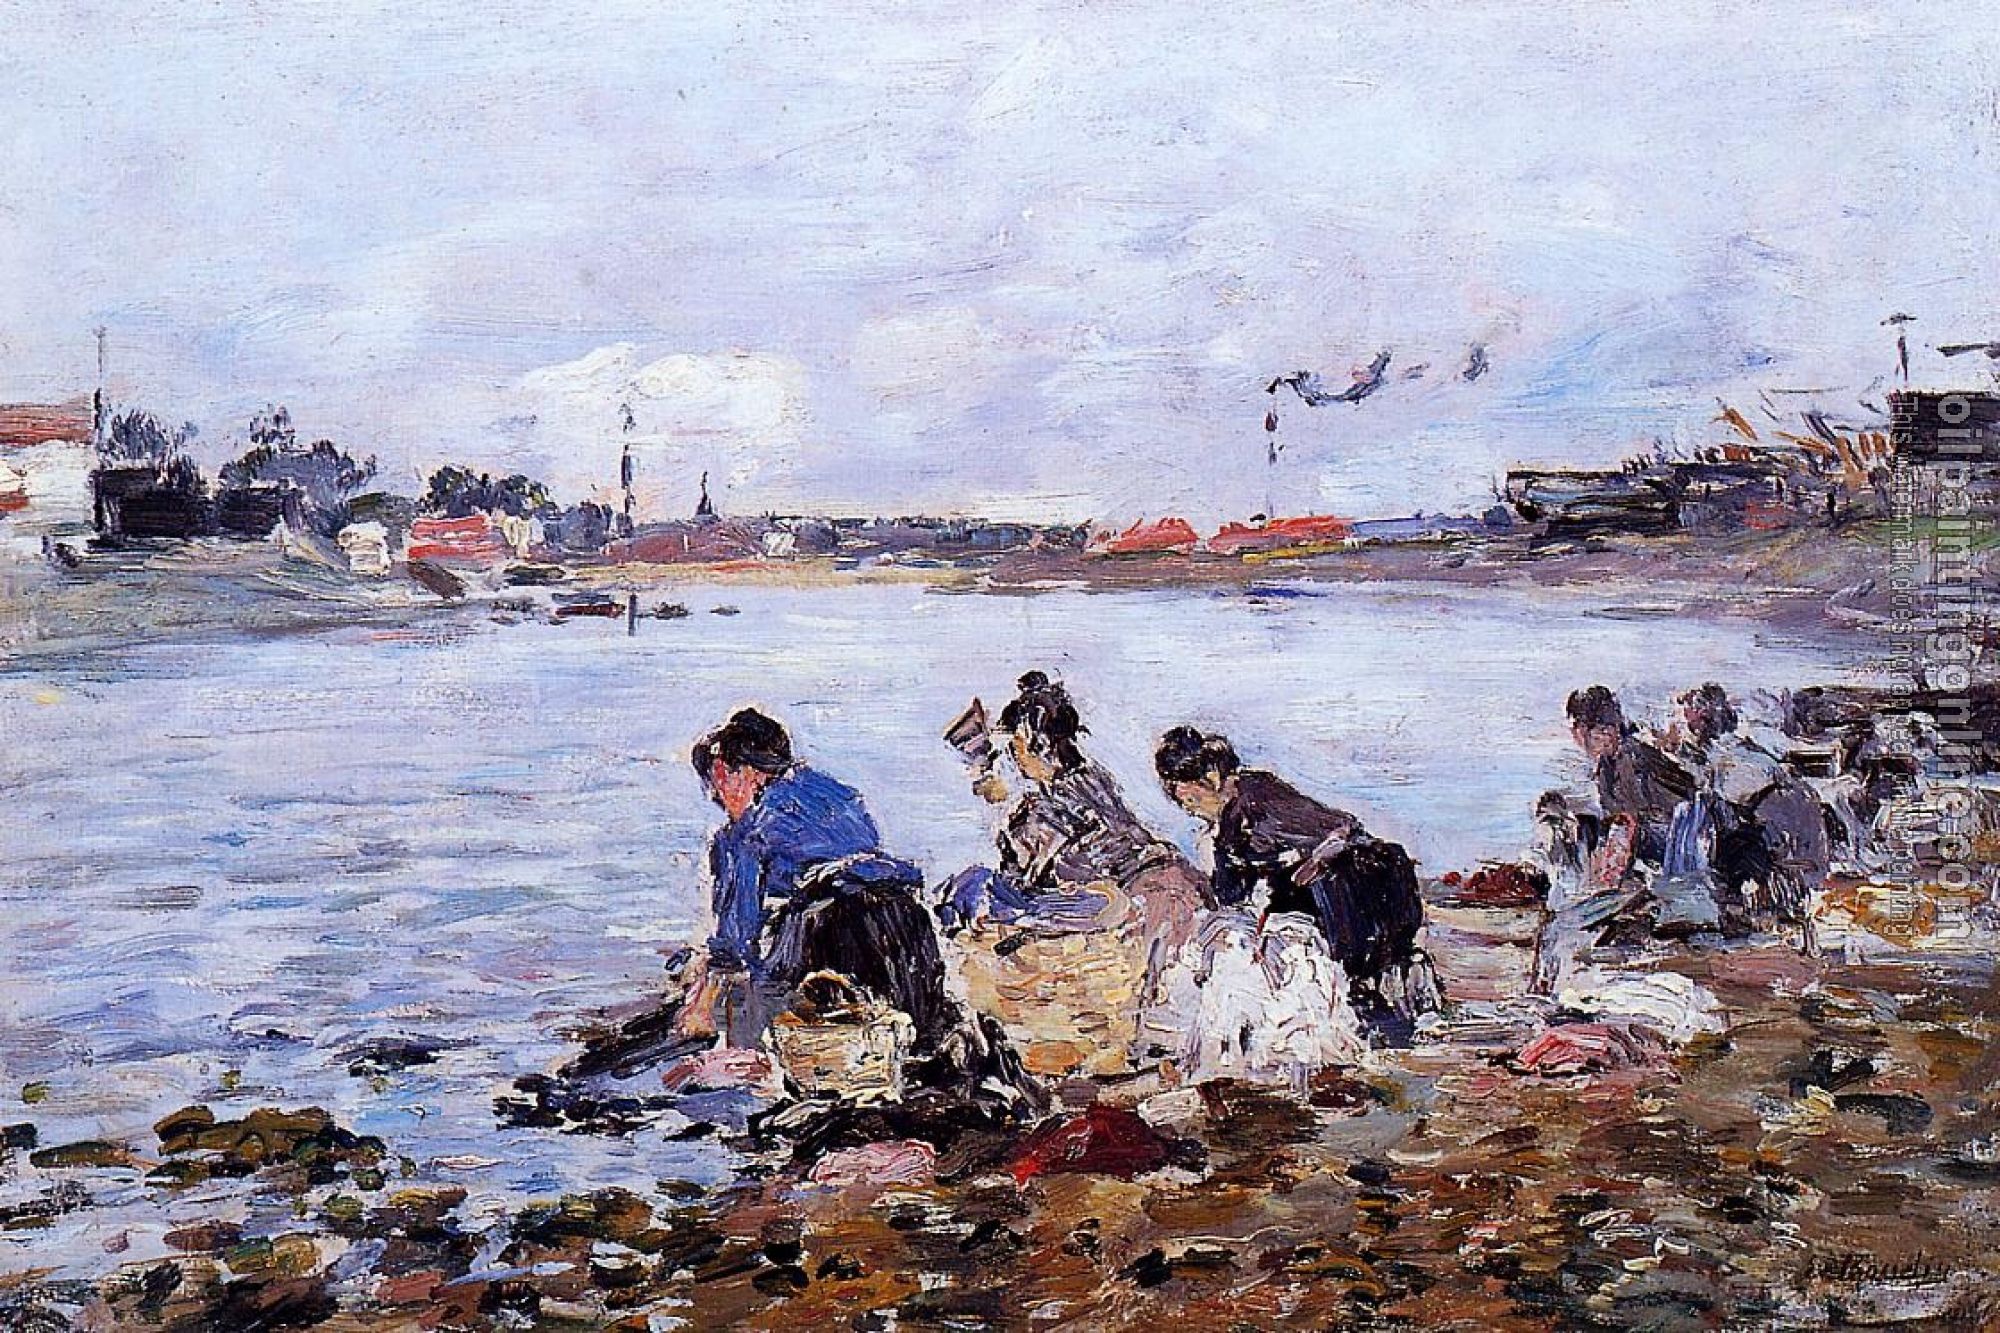 Boudin, Eugene - Laundresses on the Bankes of the Touques